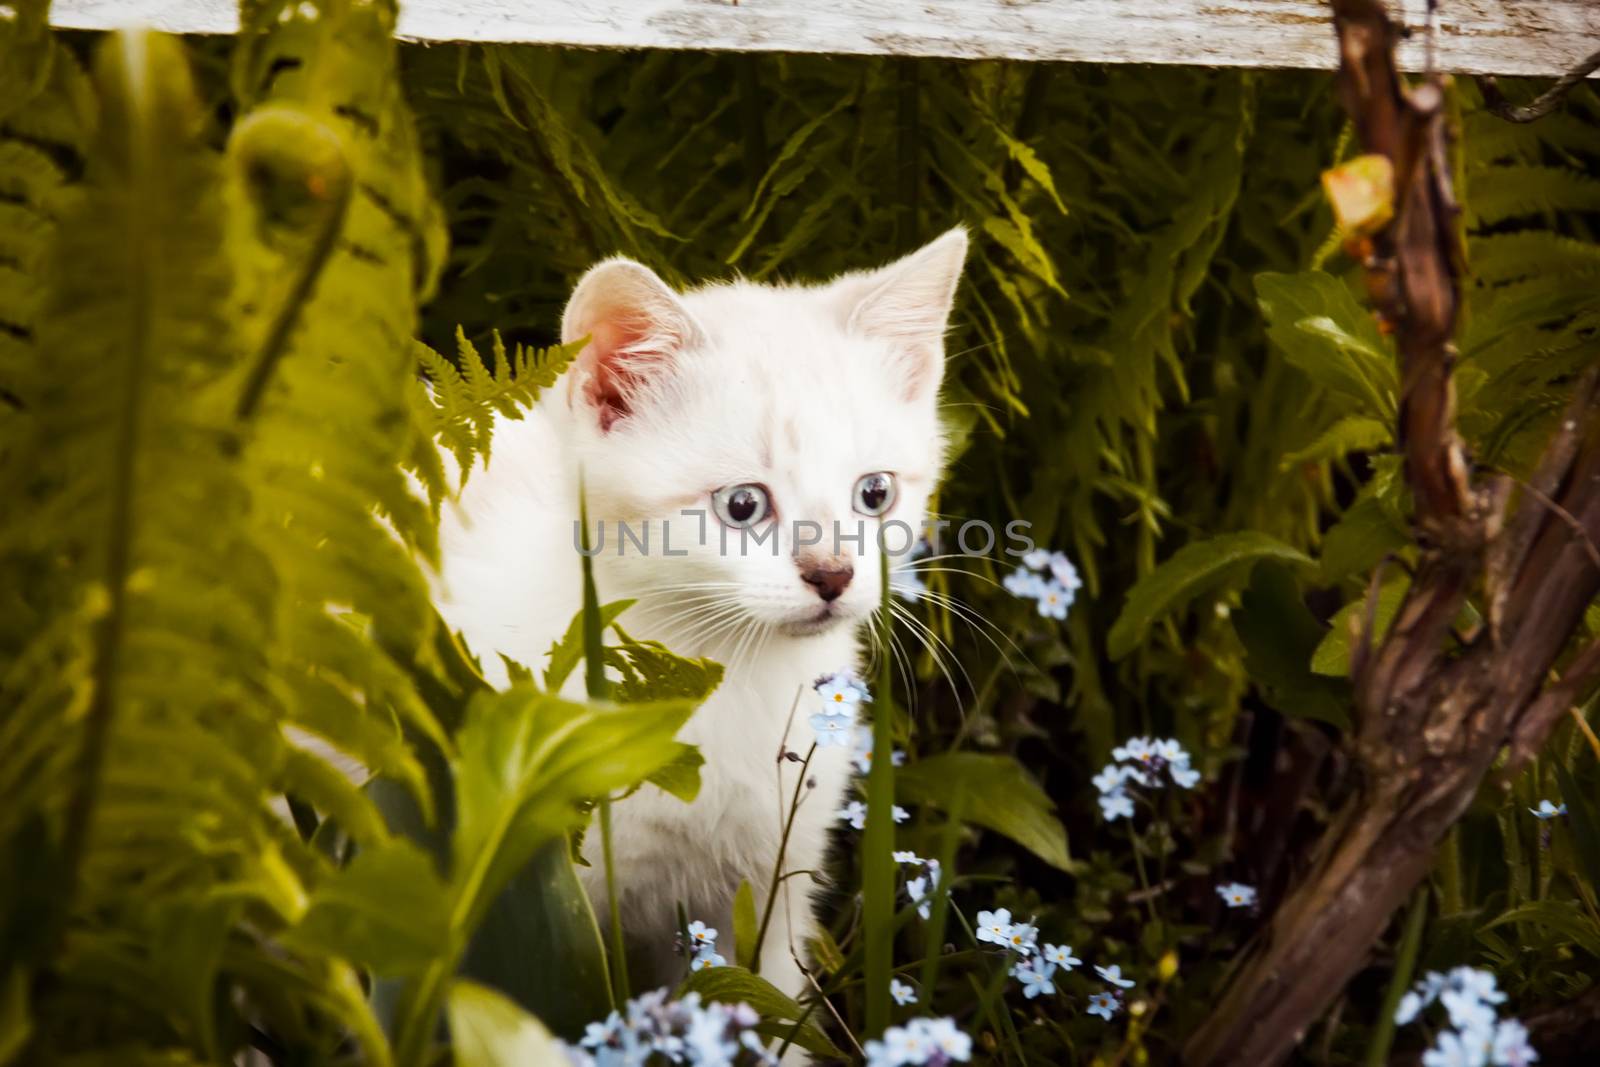 the kitten to smell the flowers